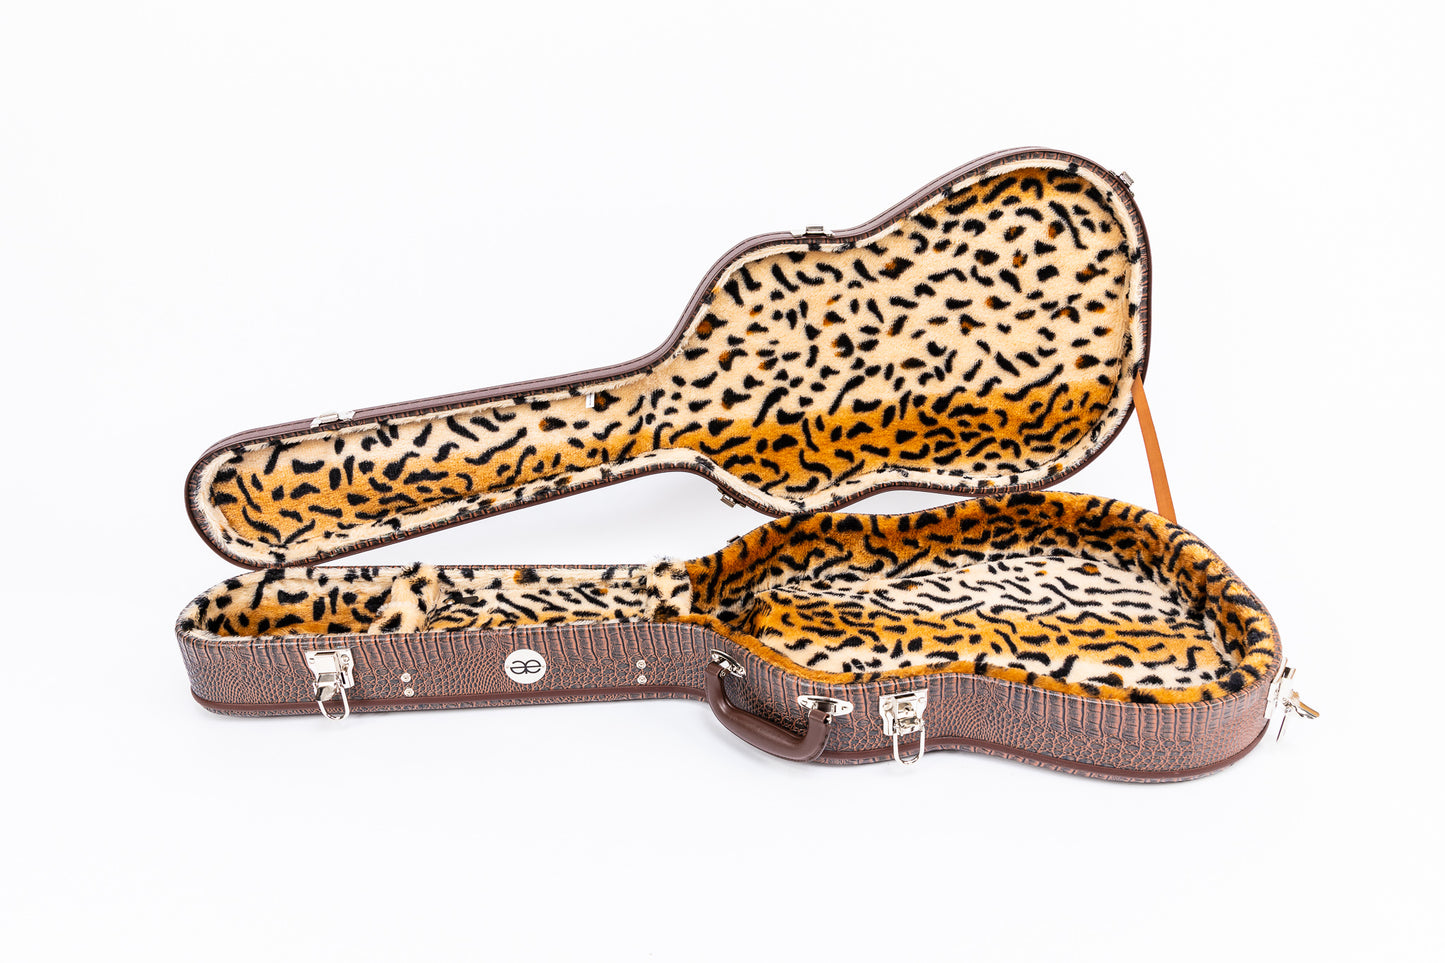 AE Guitars Hardshell Guitar Case Brown Leather with Leopard Interior for Gretsch Jet Styles